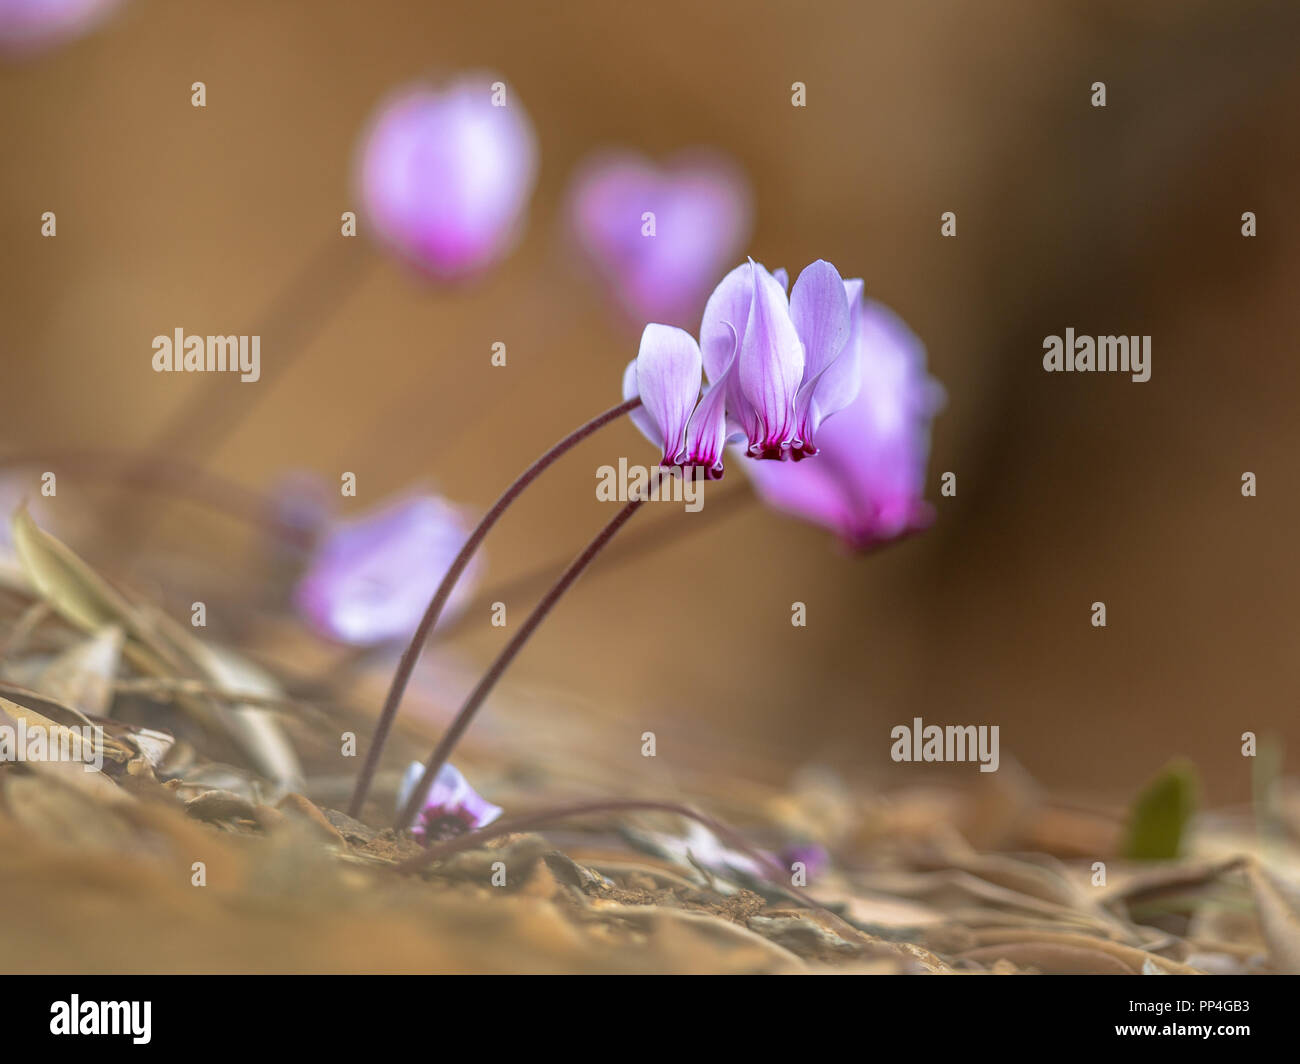 Group of Ivy-leaved cyclamen or sowbread (Cyclamen hederifolium) in bloom with bright background Stock Photo